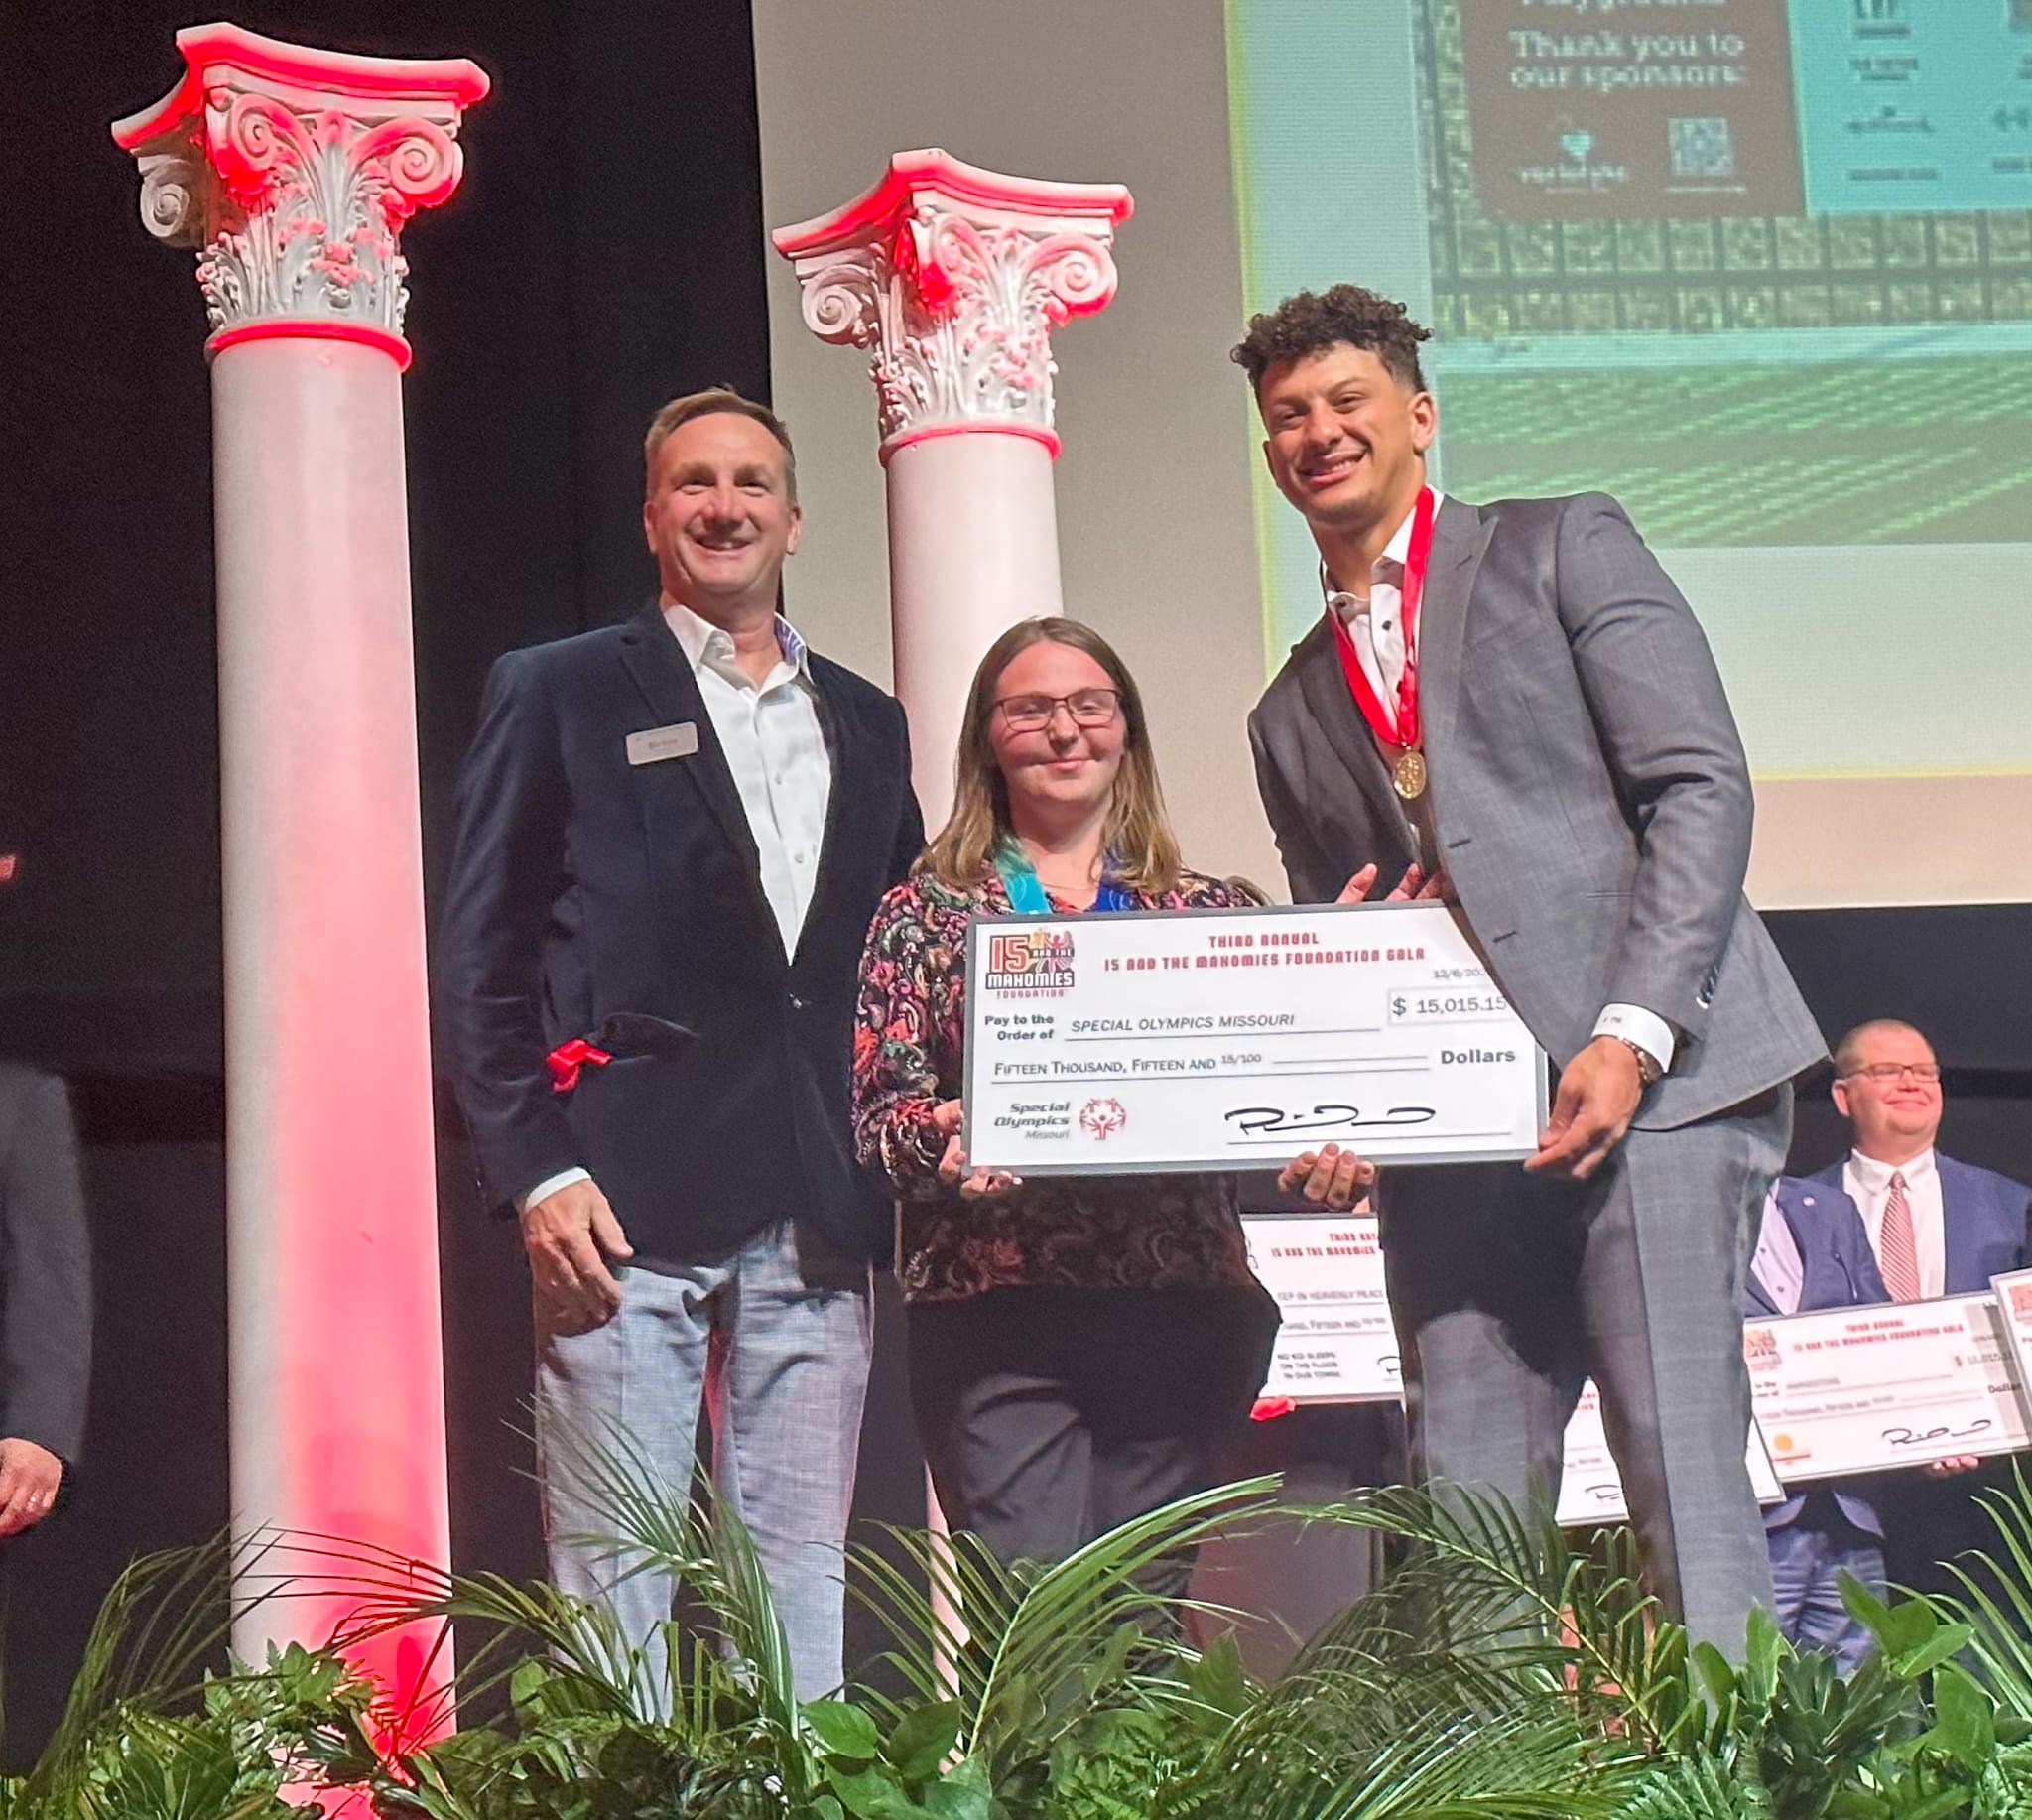 Patrick Mahomes presented a check to SOMO athlete Shyanne Pyatt and staff member Brian Neuner at the third annual 15 and the Mahomies event on Tuesday, Dec. 6, 2022 in Kansas City, Mo.